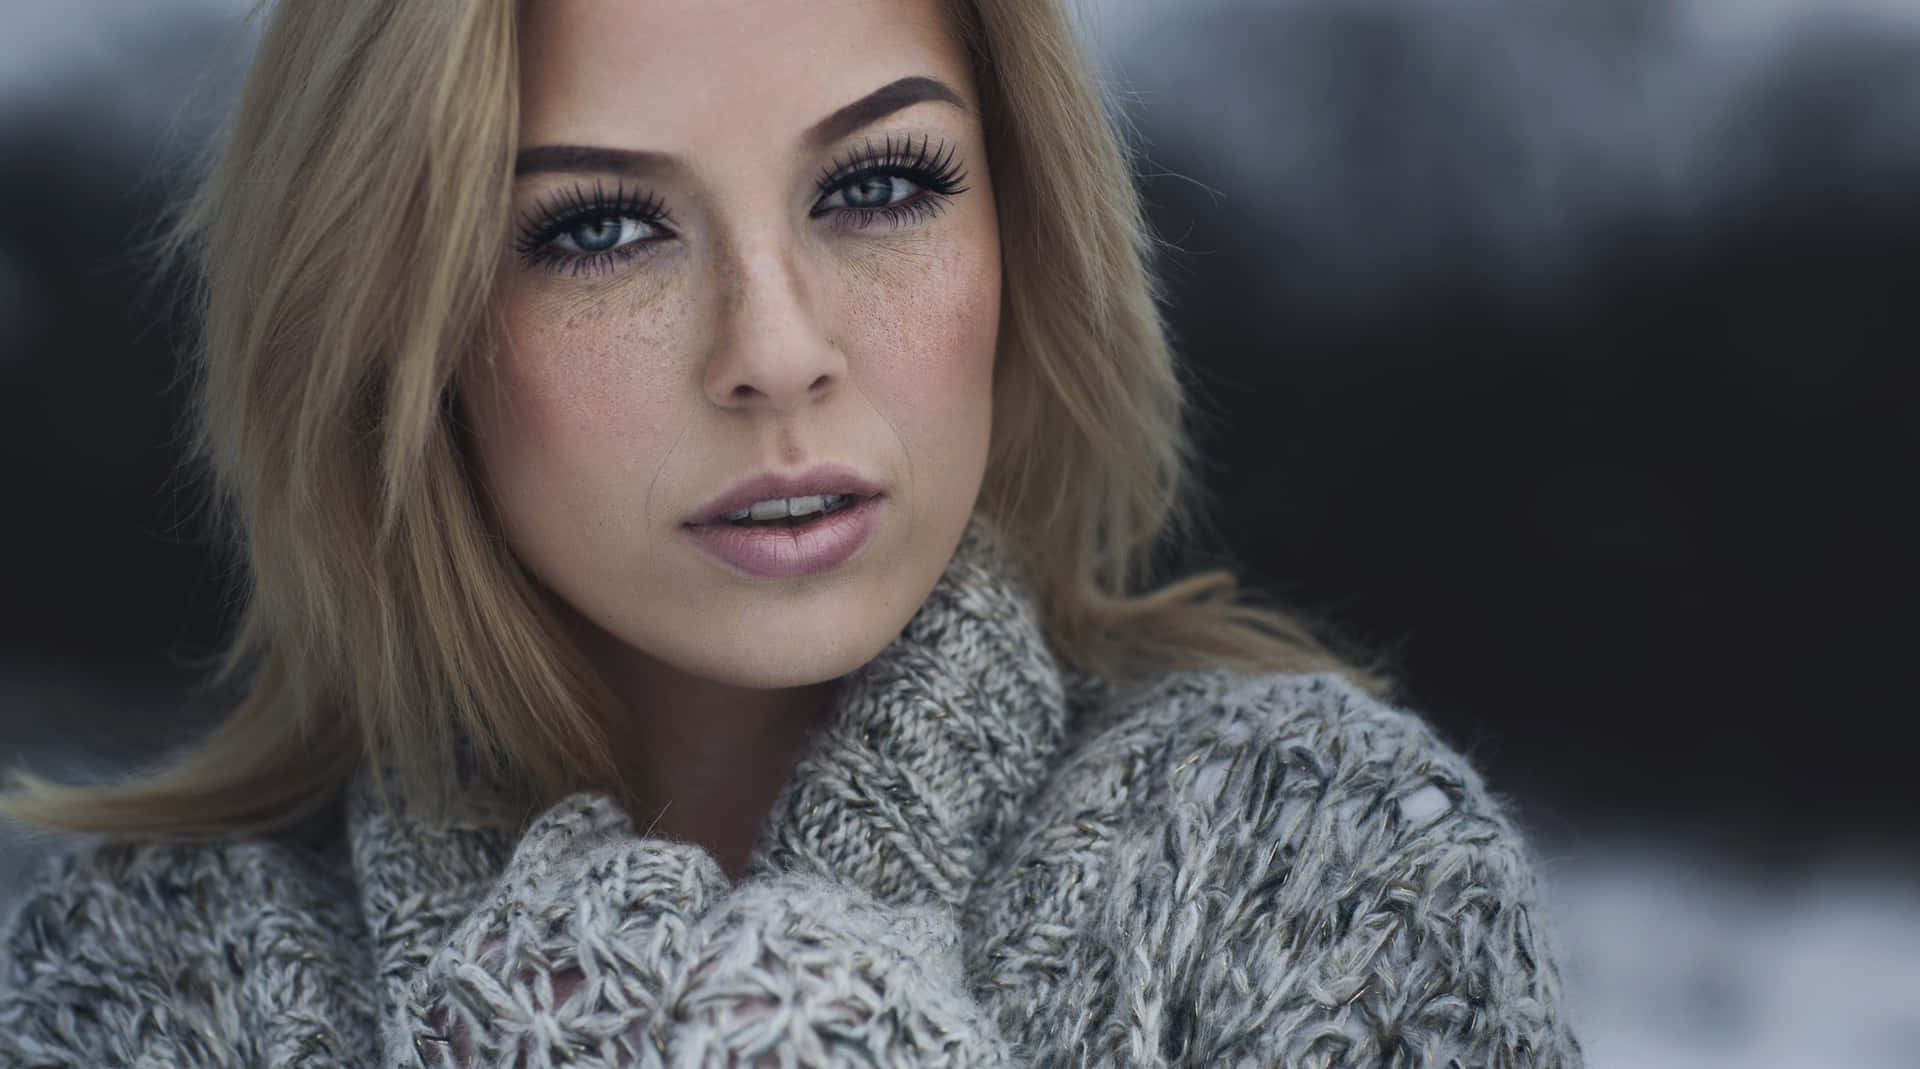 A Beautiful Woman In A Sweater Posing In The Snow